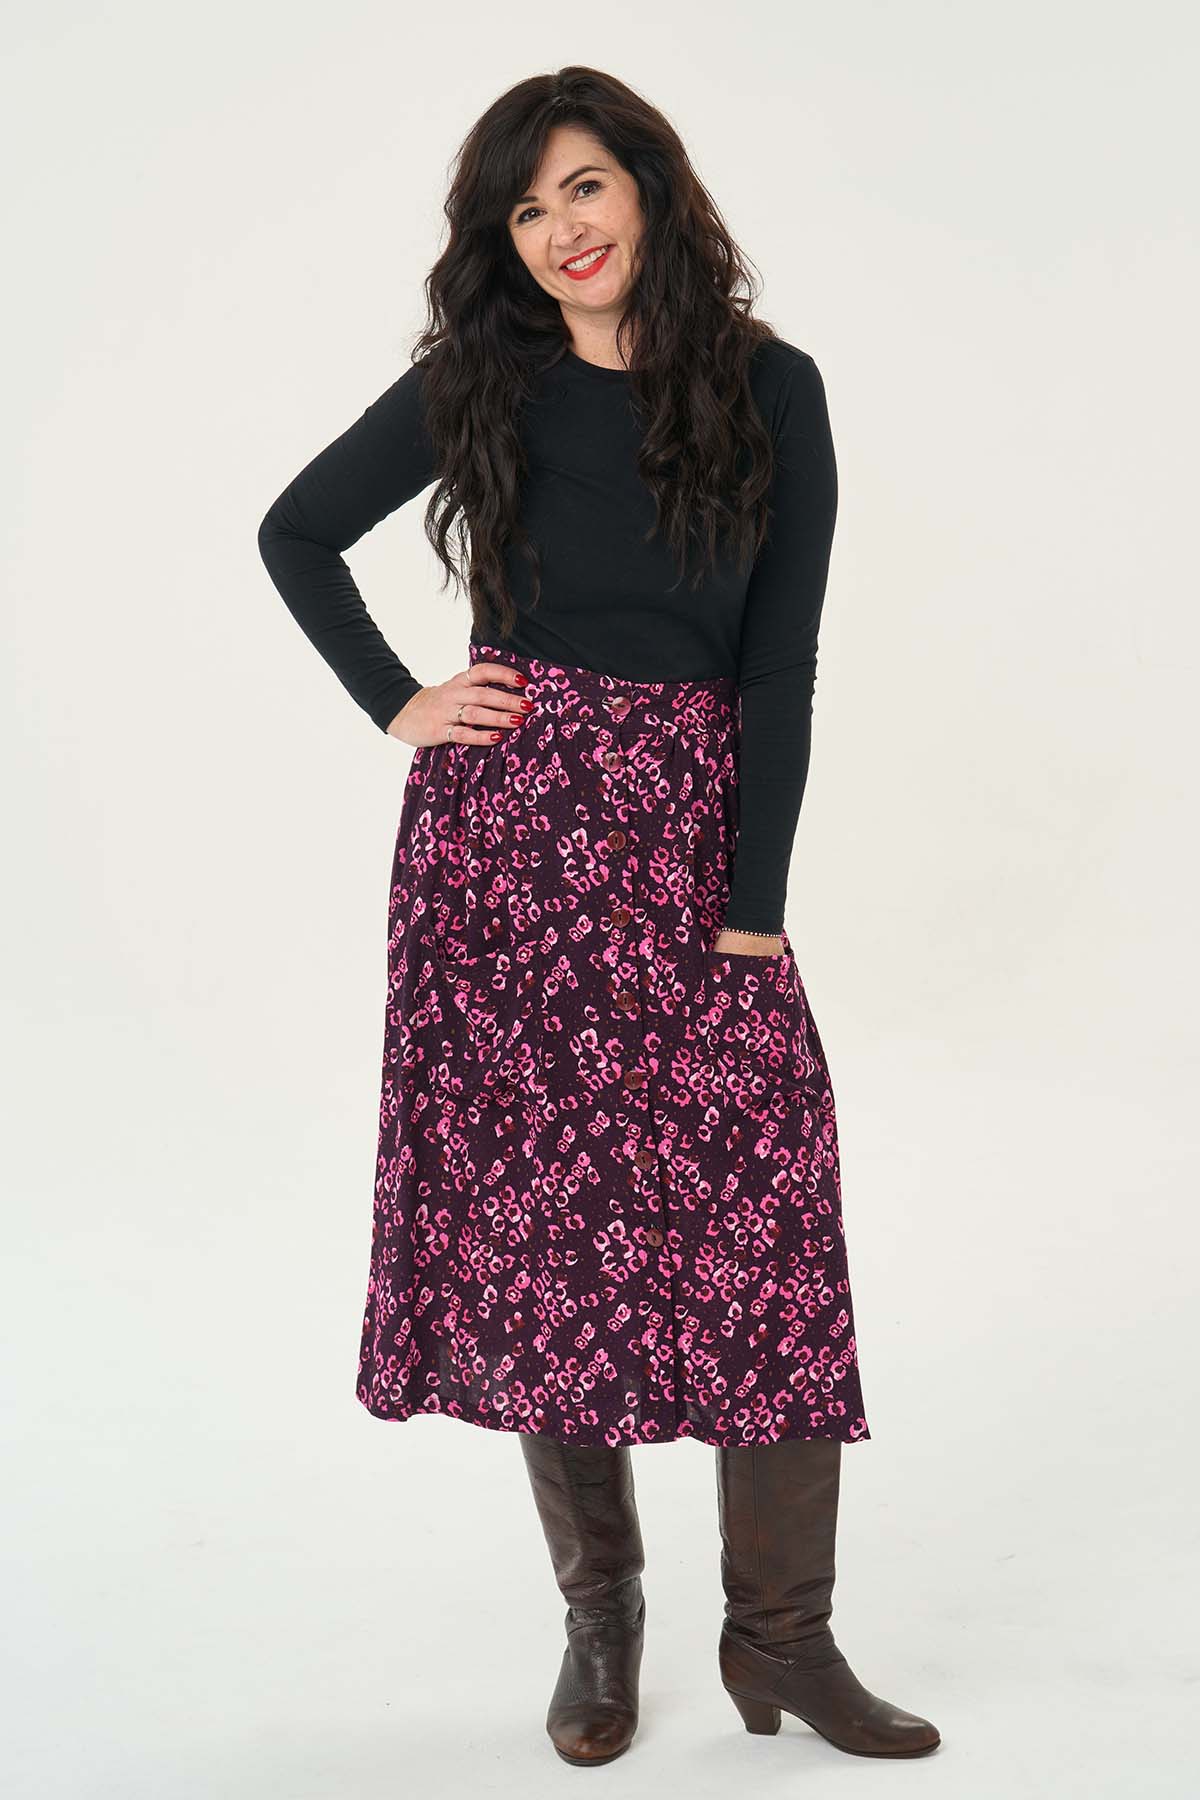 Mesh Overlay Layered Skirt - 3 Colours - Just $7